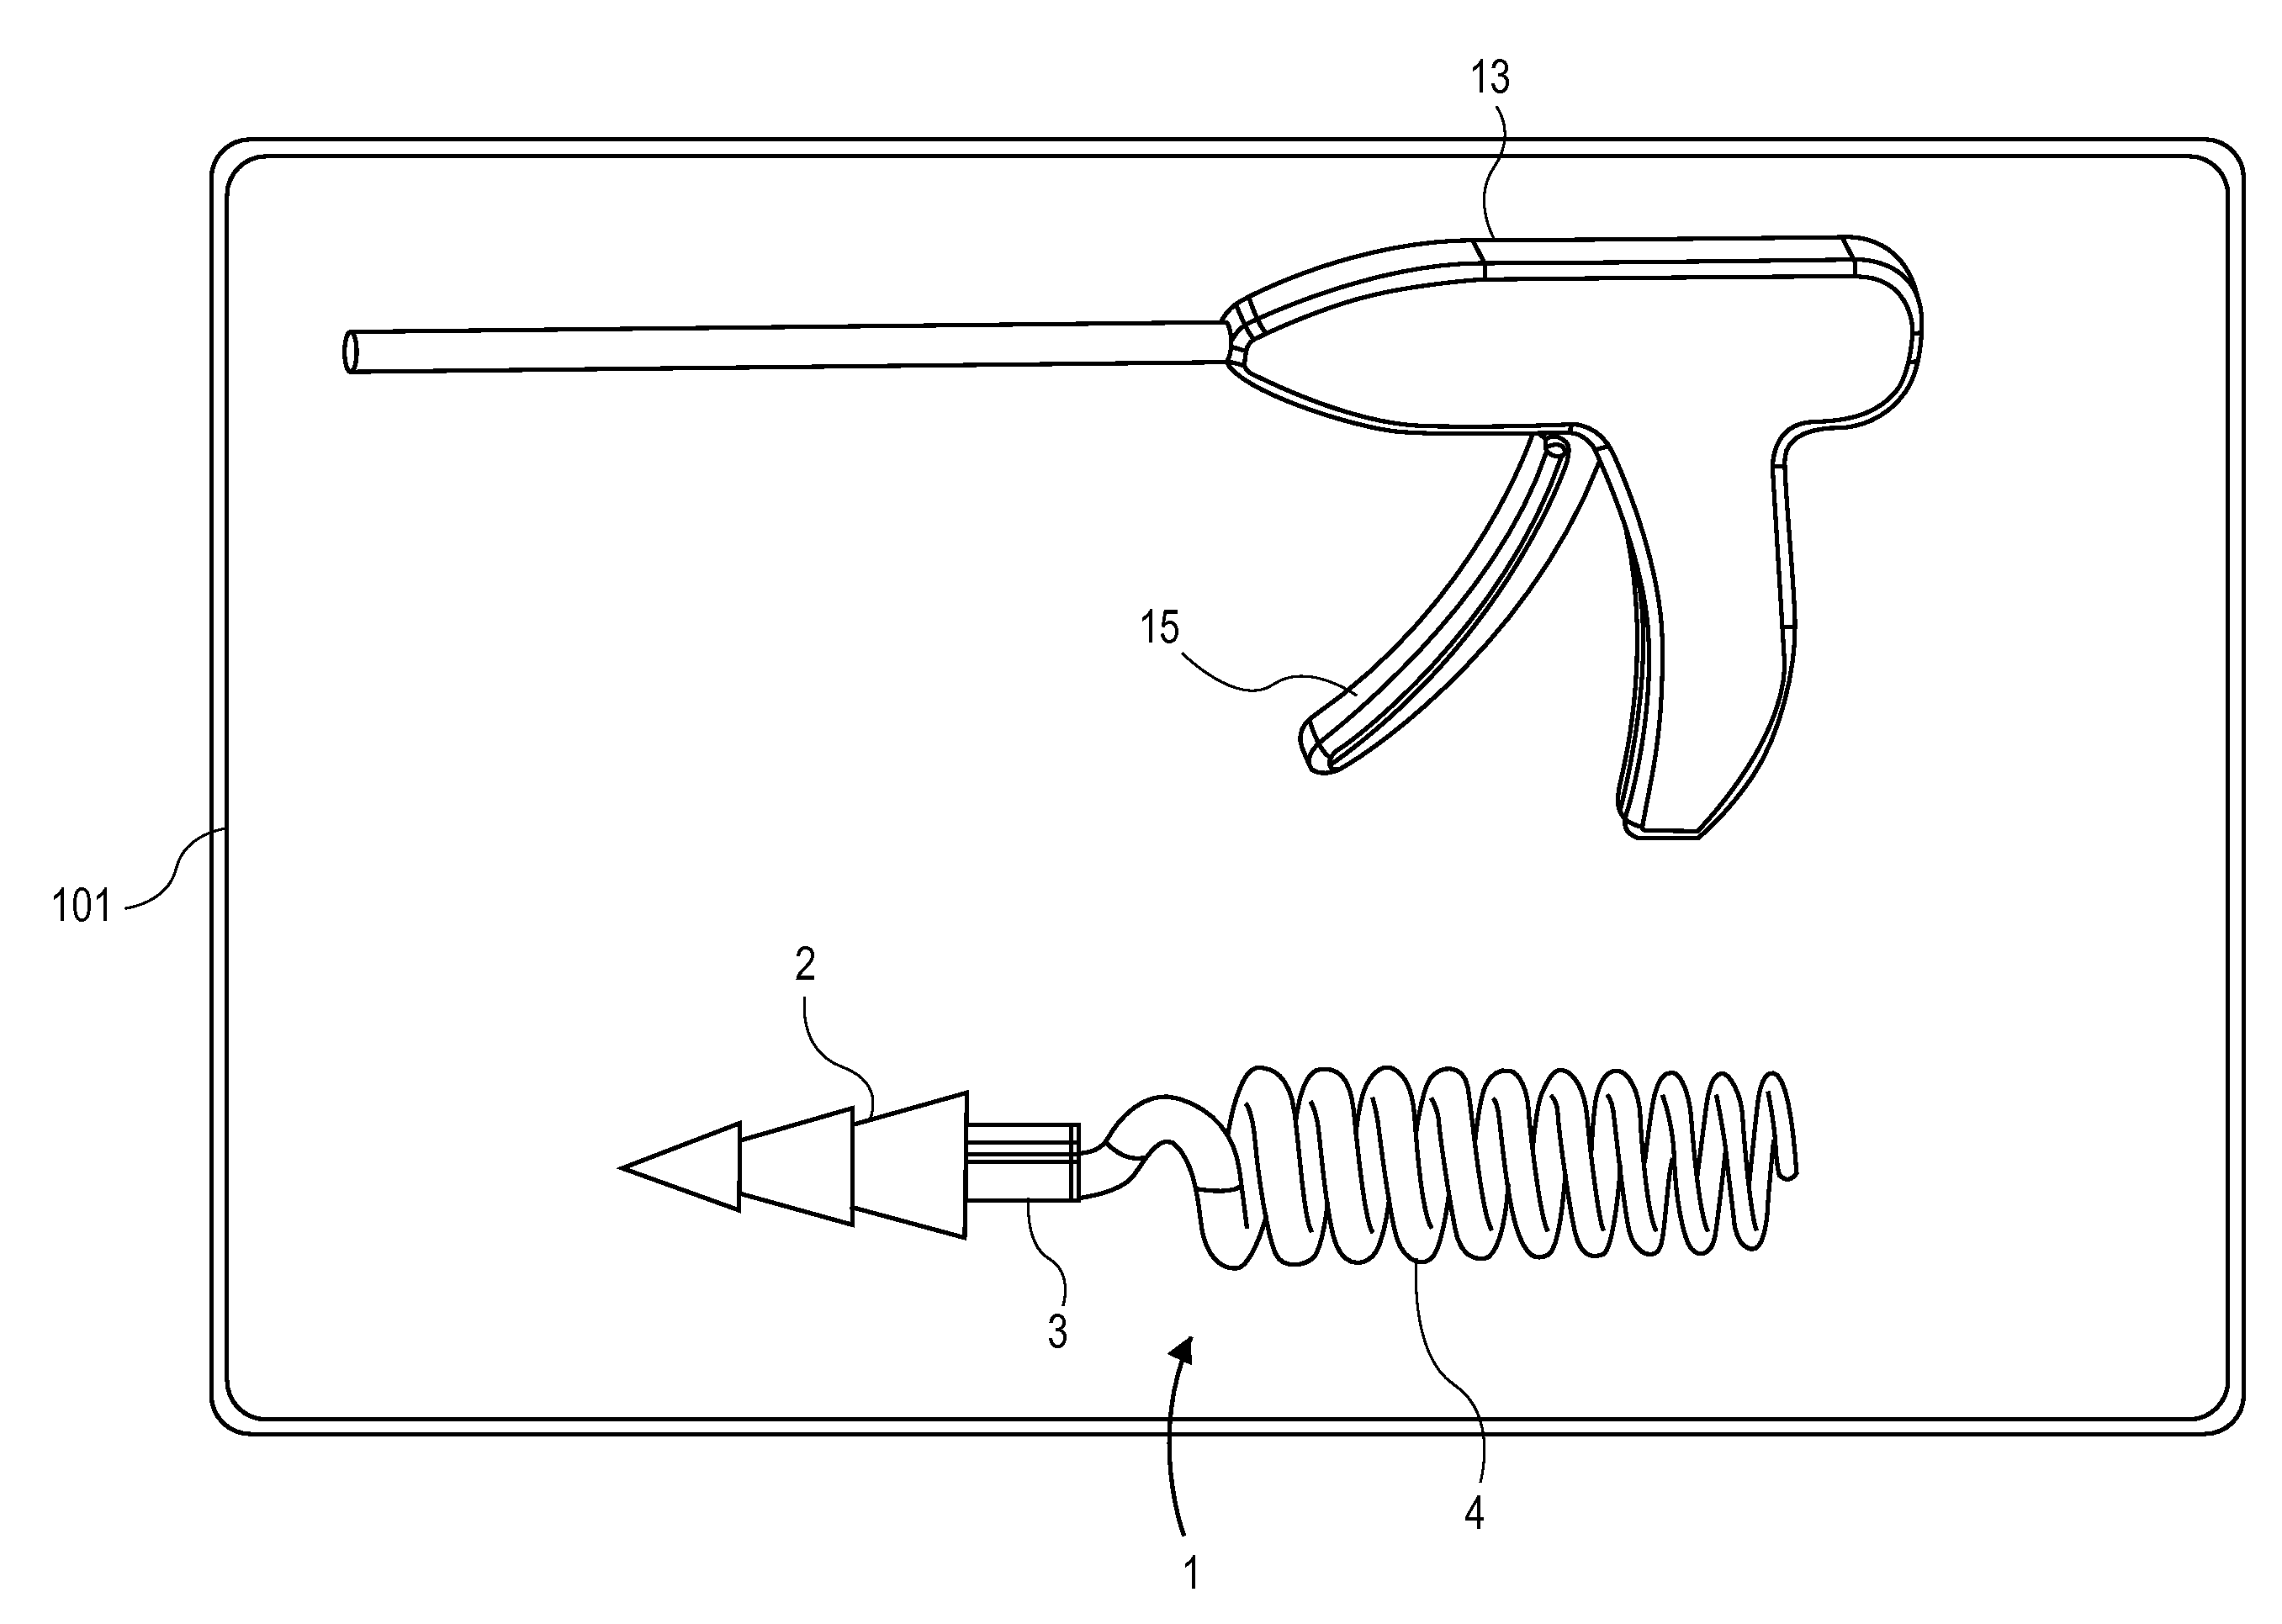 Implantable medicament delivery device and delivery tool and method for use therewith